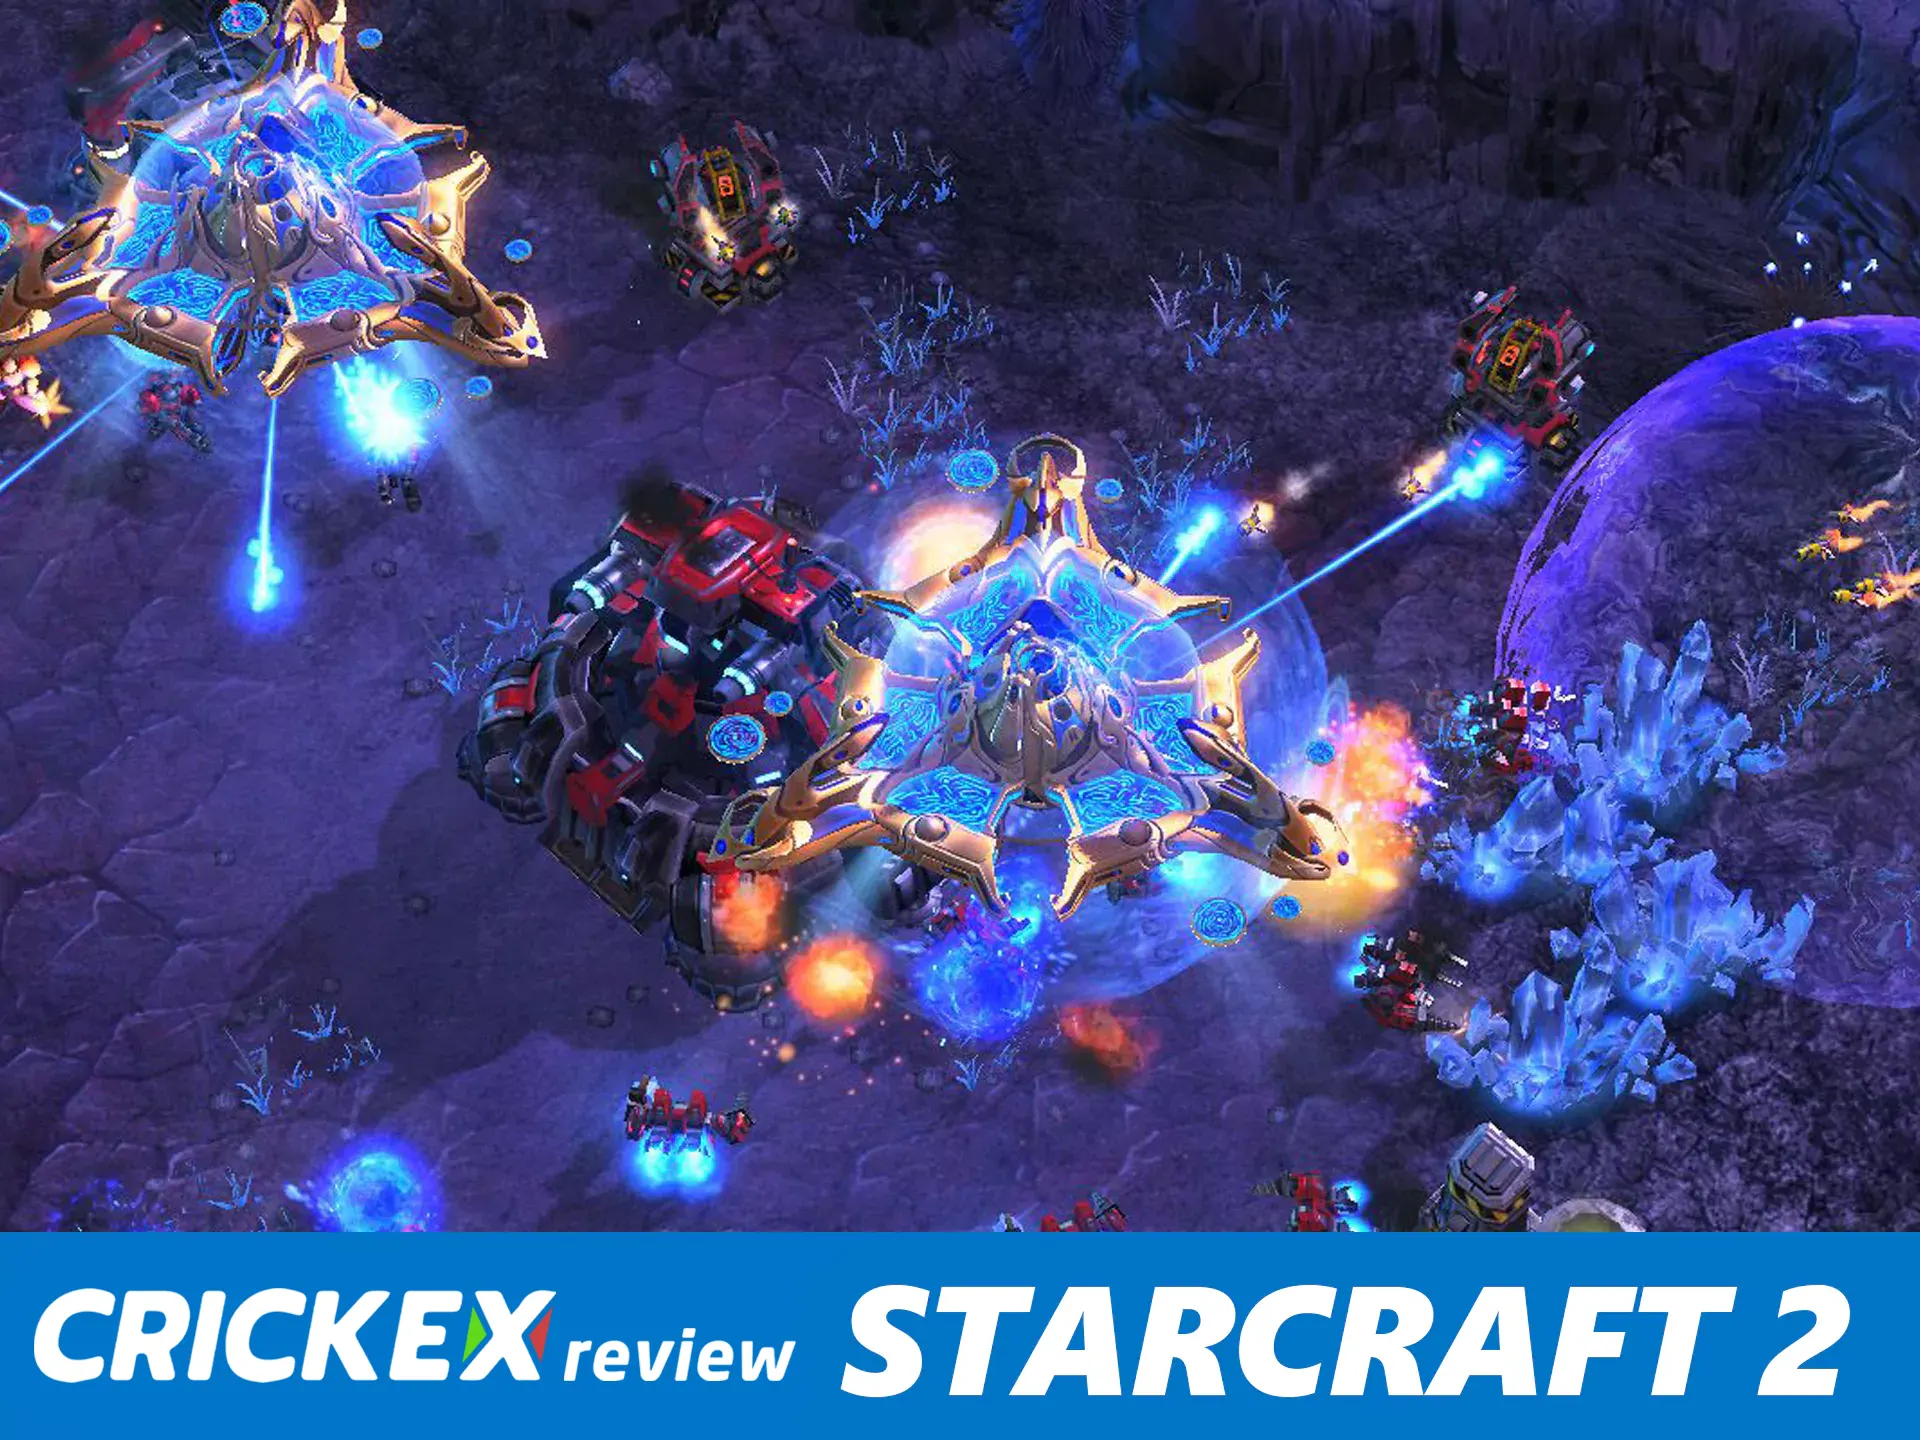 Crickex offers betting on Starcraft 2 in India.